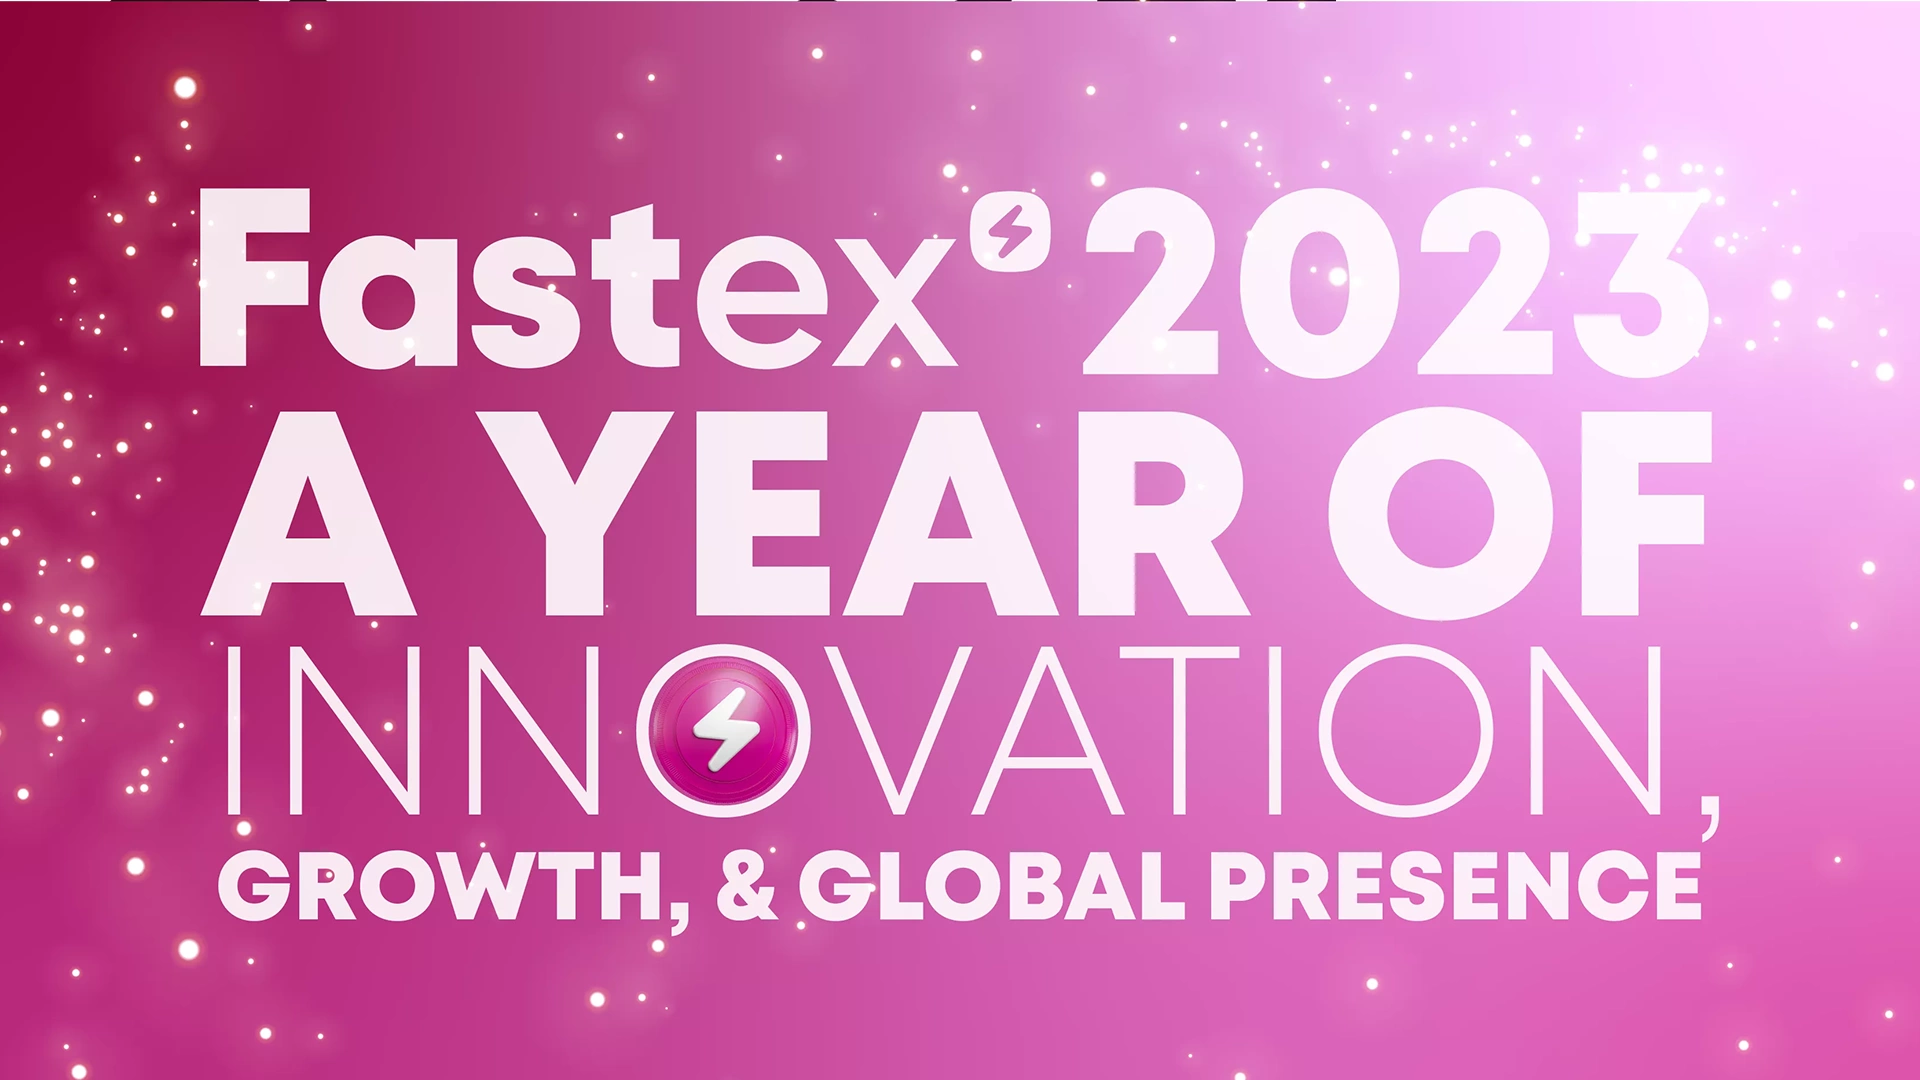 Fastex 2023: A Year of Innovation, Growth, and Global Presence